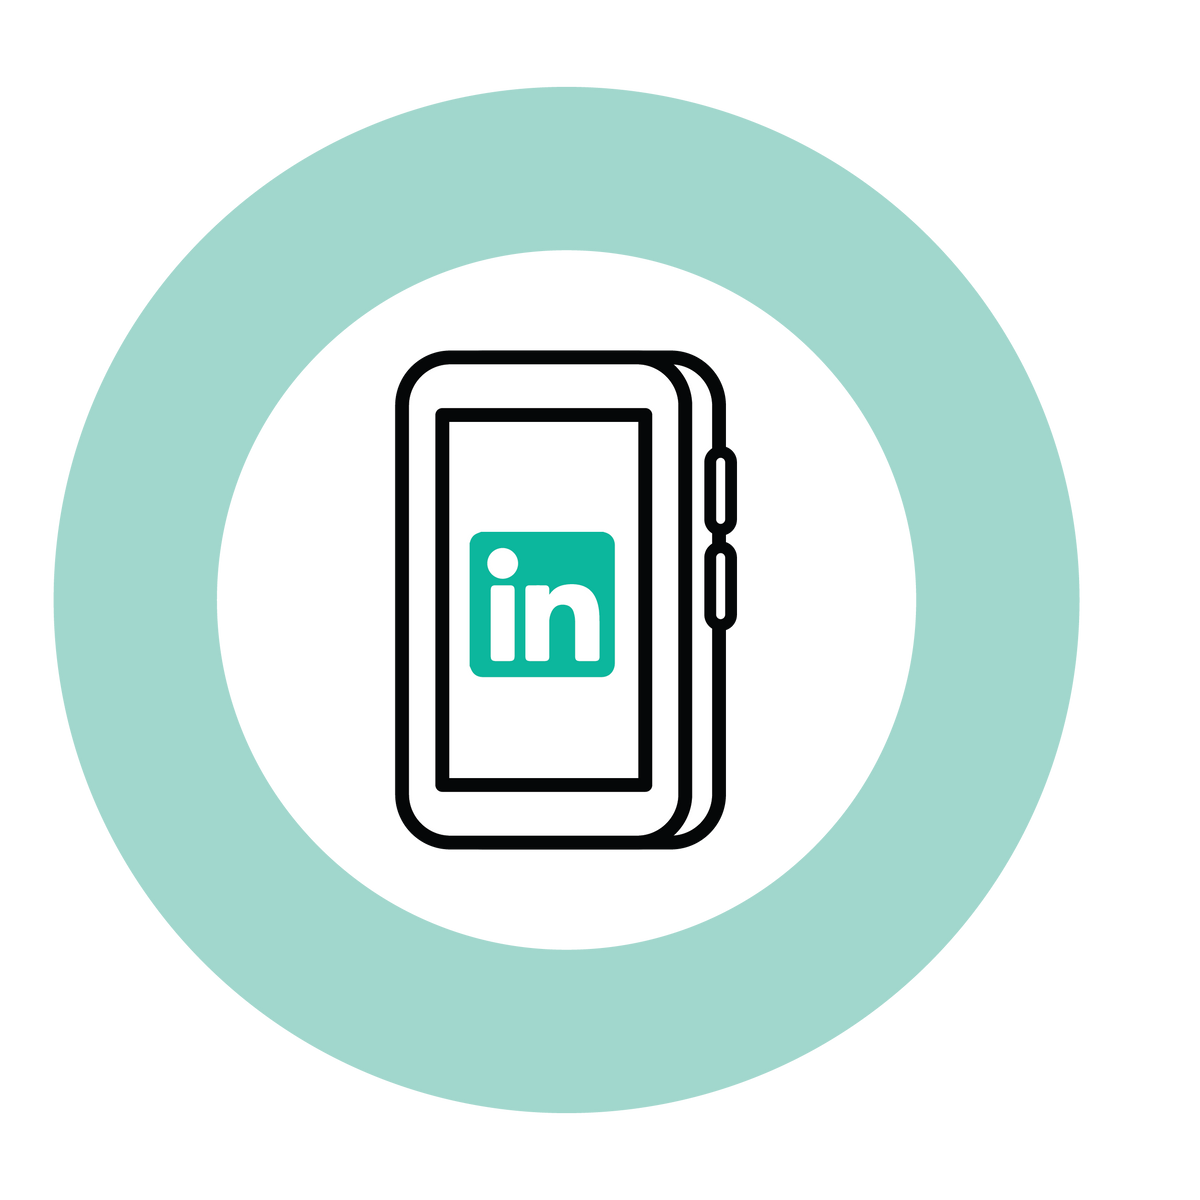 illustrated iphone with a linkedin logo on the screen, inside a teal circle 